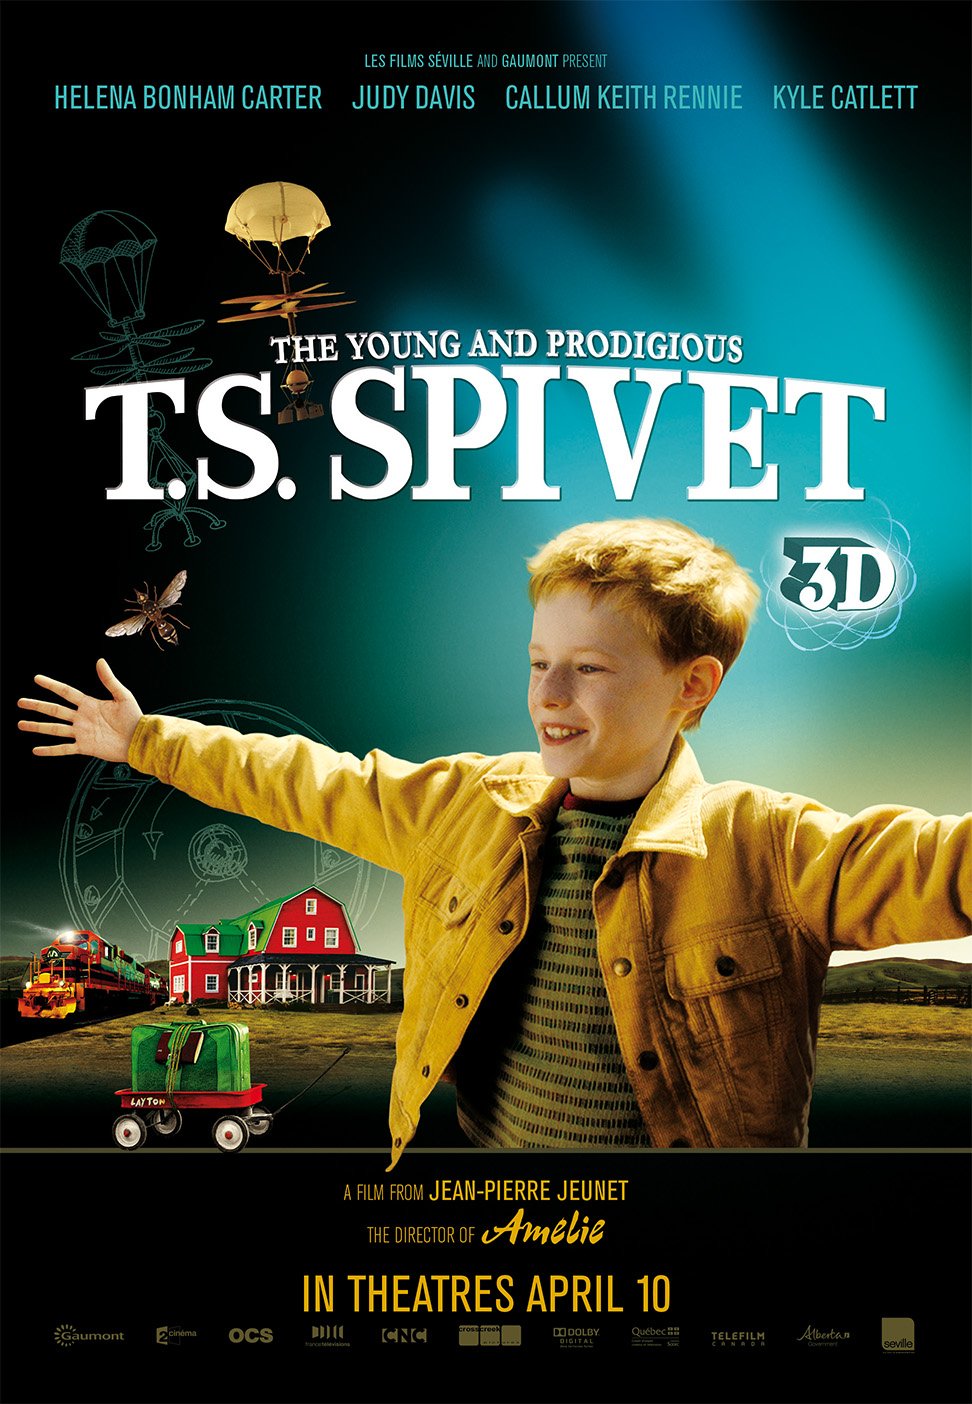 L'affiche du film The Young and Prodigious T.S. Spivet